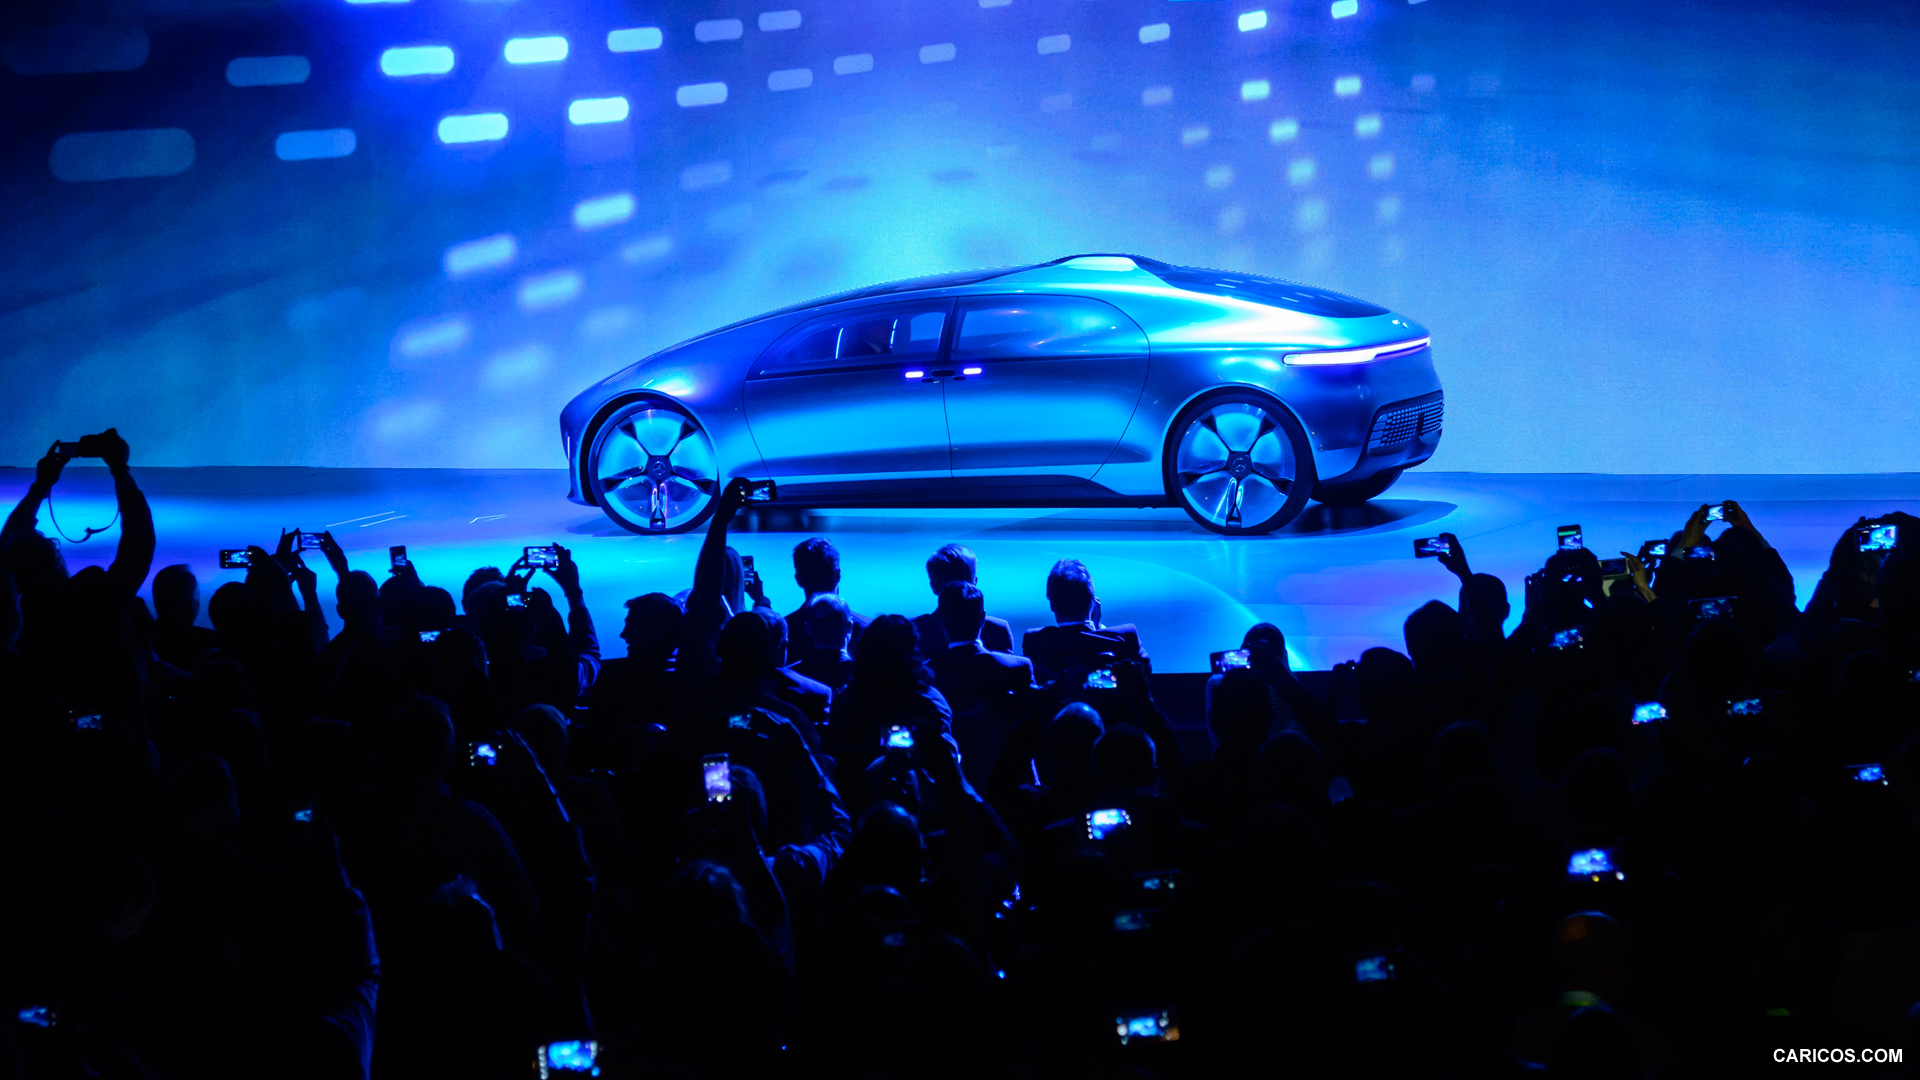 2015 Mercedes-Benz F 015 Luxury in Motion Concept at CES - Side, #81 of 92